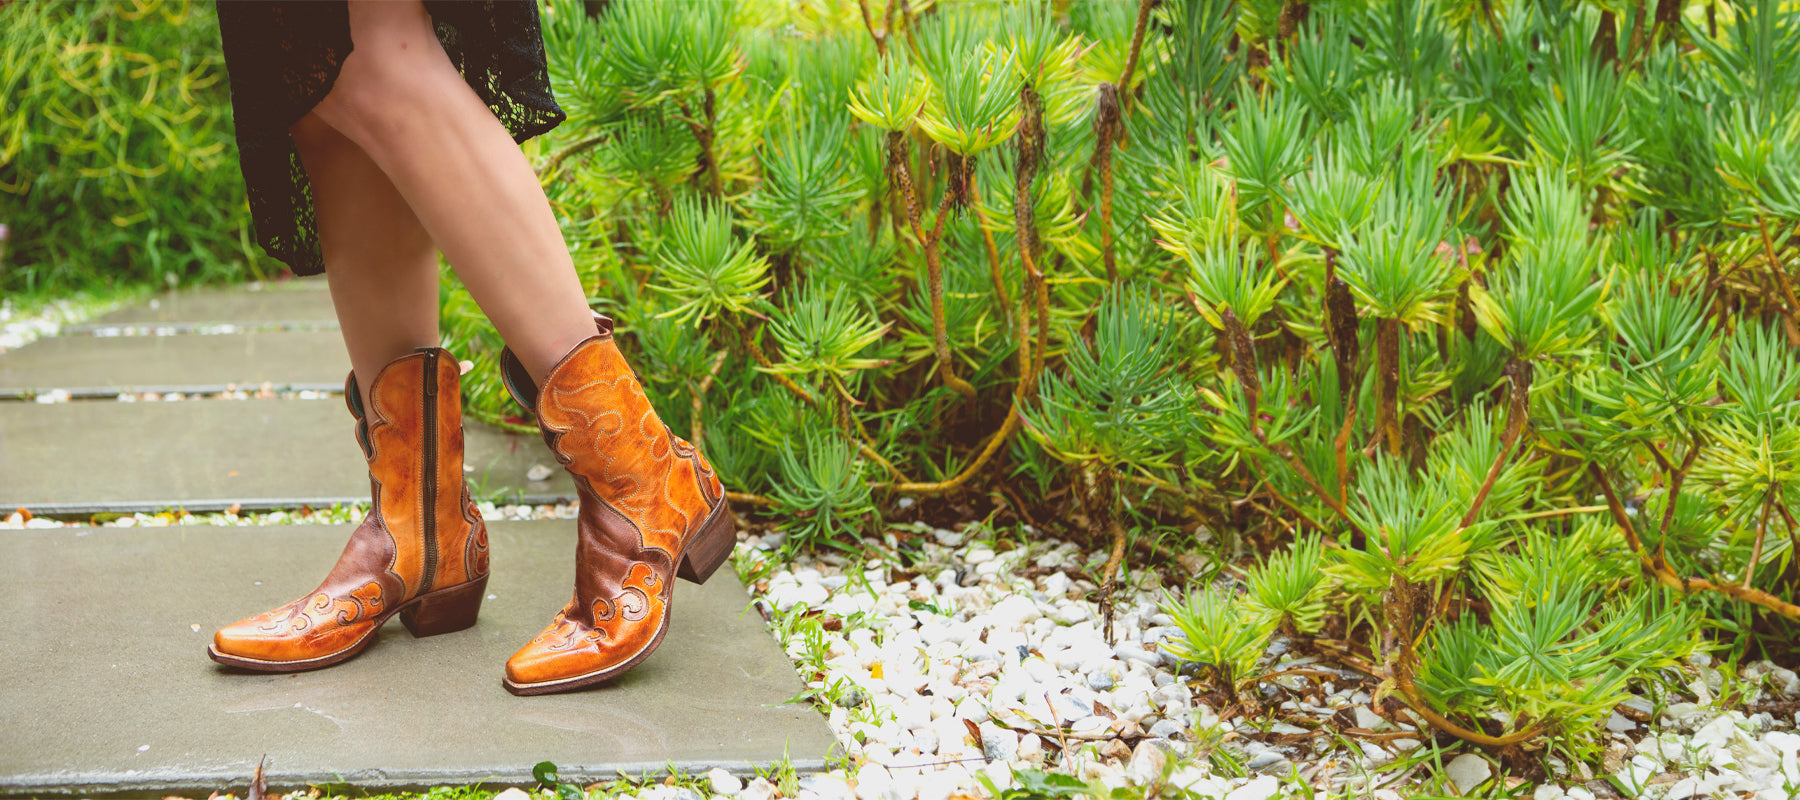 Person wearing detailed cowboy boots standing beside a garden path with lush greenery.